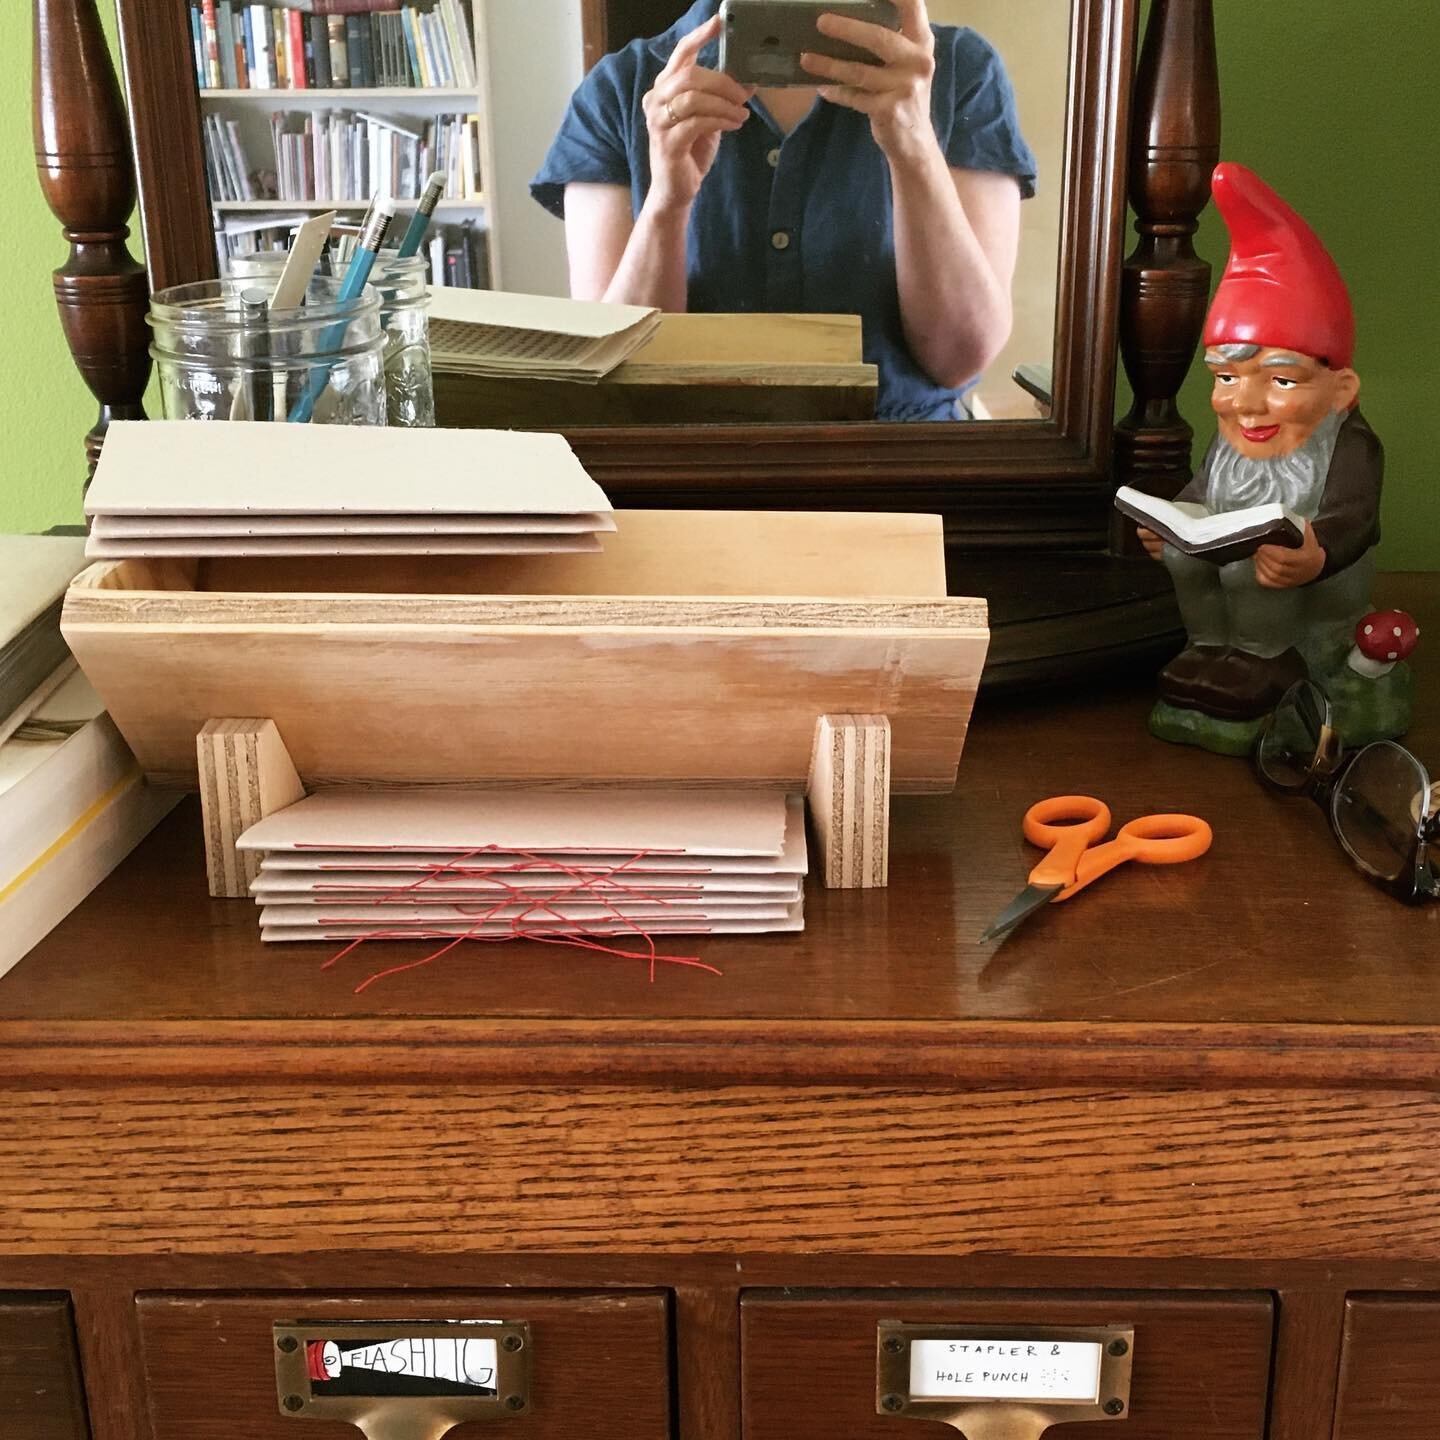 I keep creating these little &ldquo;floating&rdquo; studios&hellip; a jar, an anchovy tin&hellip; or this little setup on top of my card-catalog. I&rsquo;m able to sneak some moments of making while my one-year-old is playing happily.